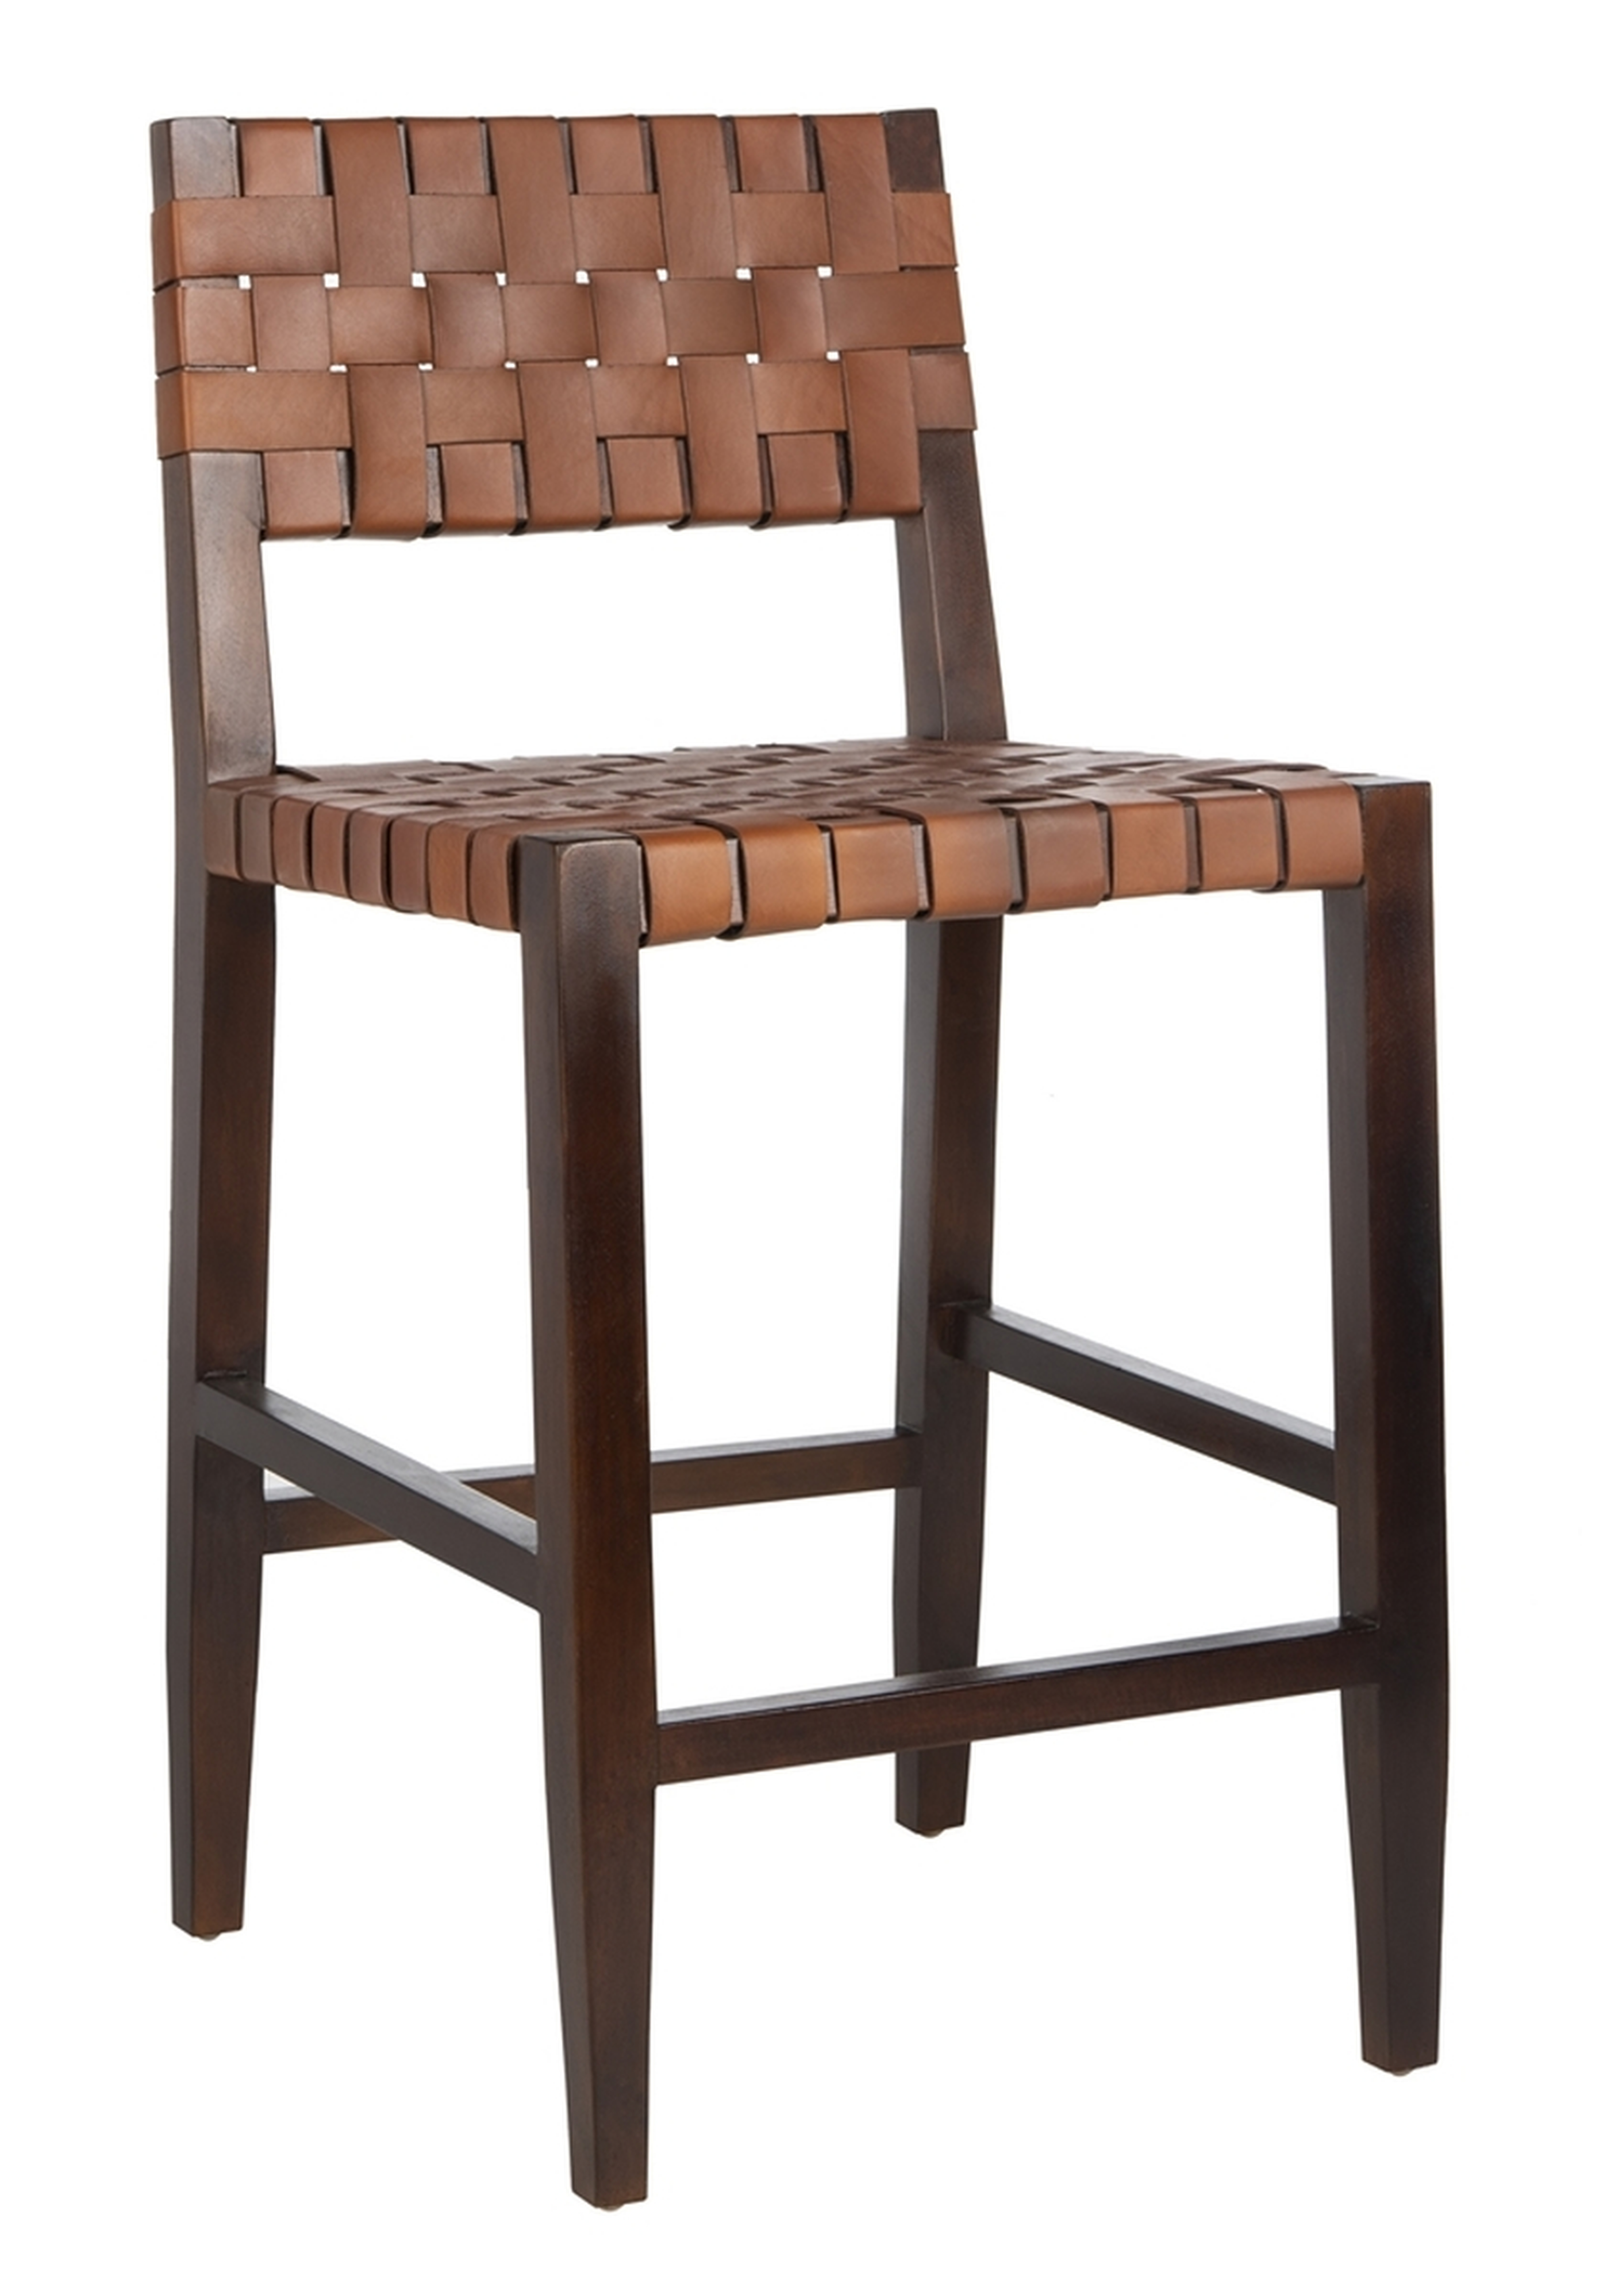 Paxton Woven Leather Counter Stool - Cognac - Safavieh - Arlo Home